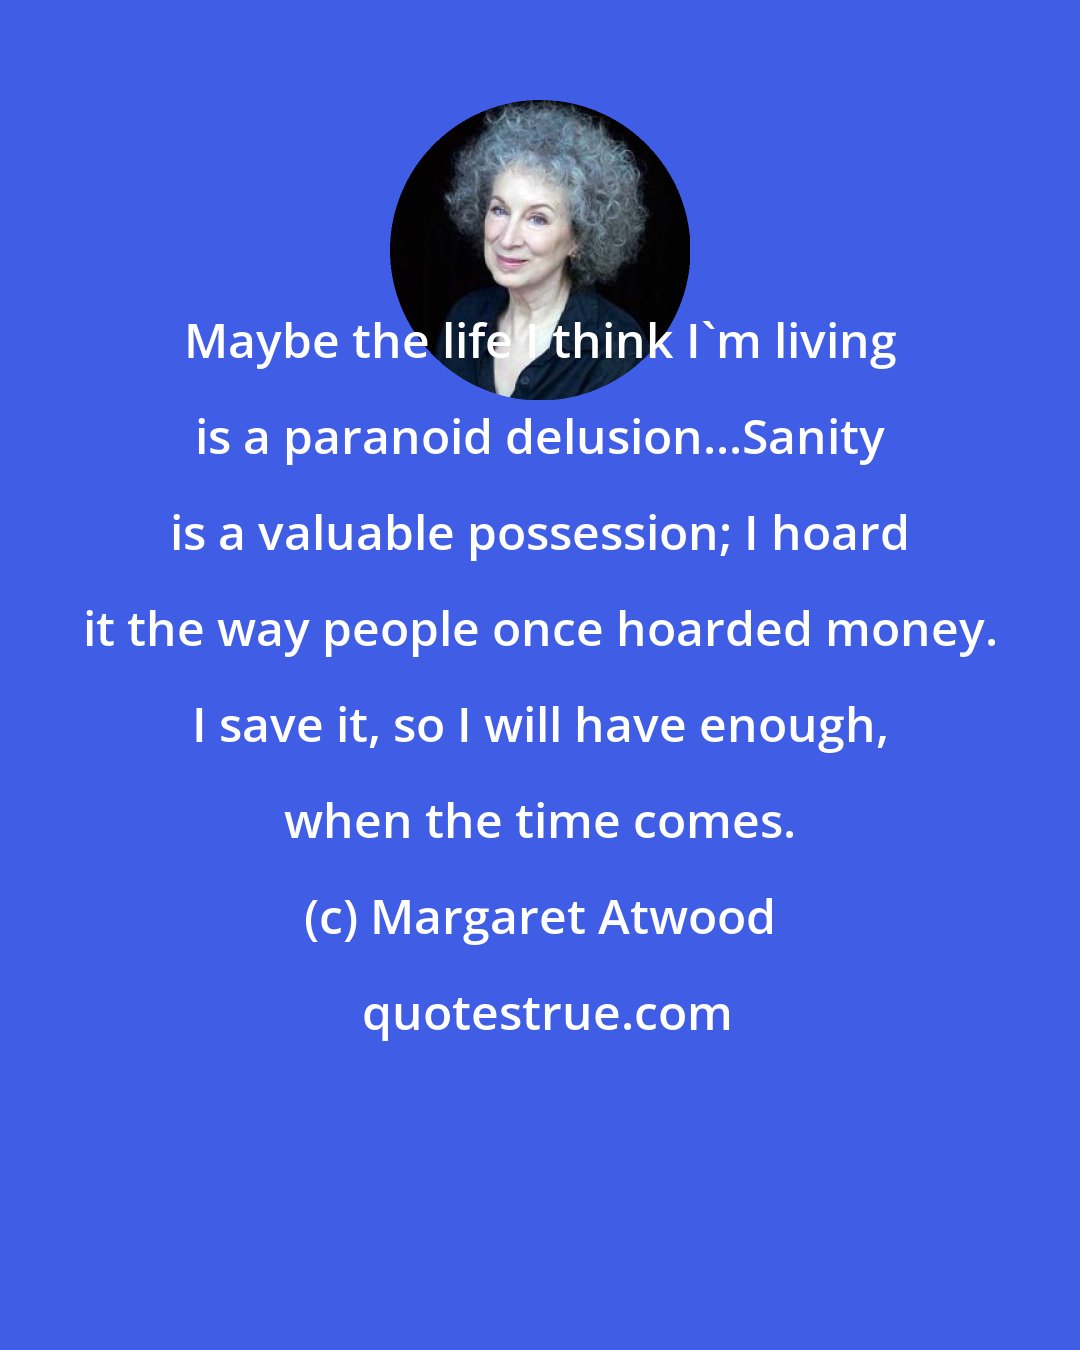 Margaret Atwood: Maybe the life I think I'm living is a paranoid delusion...Sanity is a valuable possession; I hoard it the way people once hoarded money. I save it, so I will have enough, when the time comes.